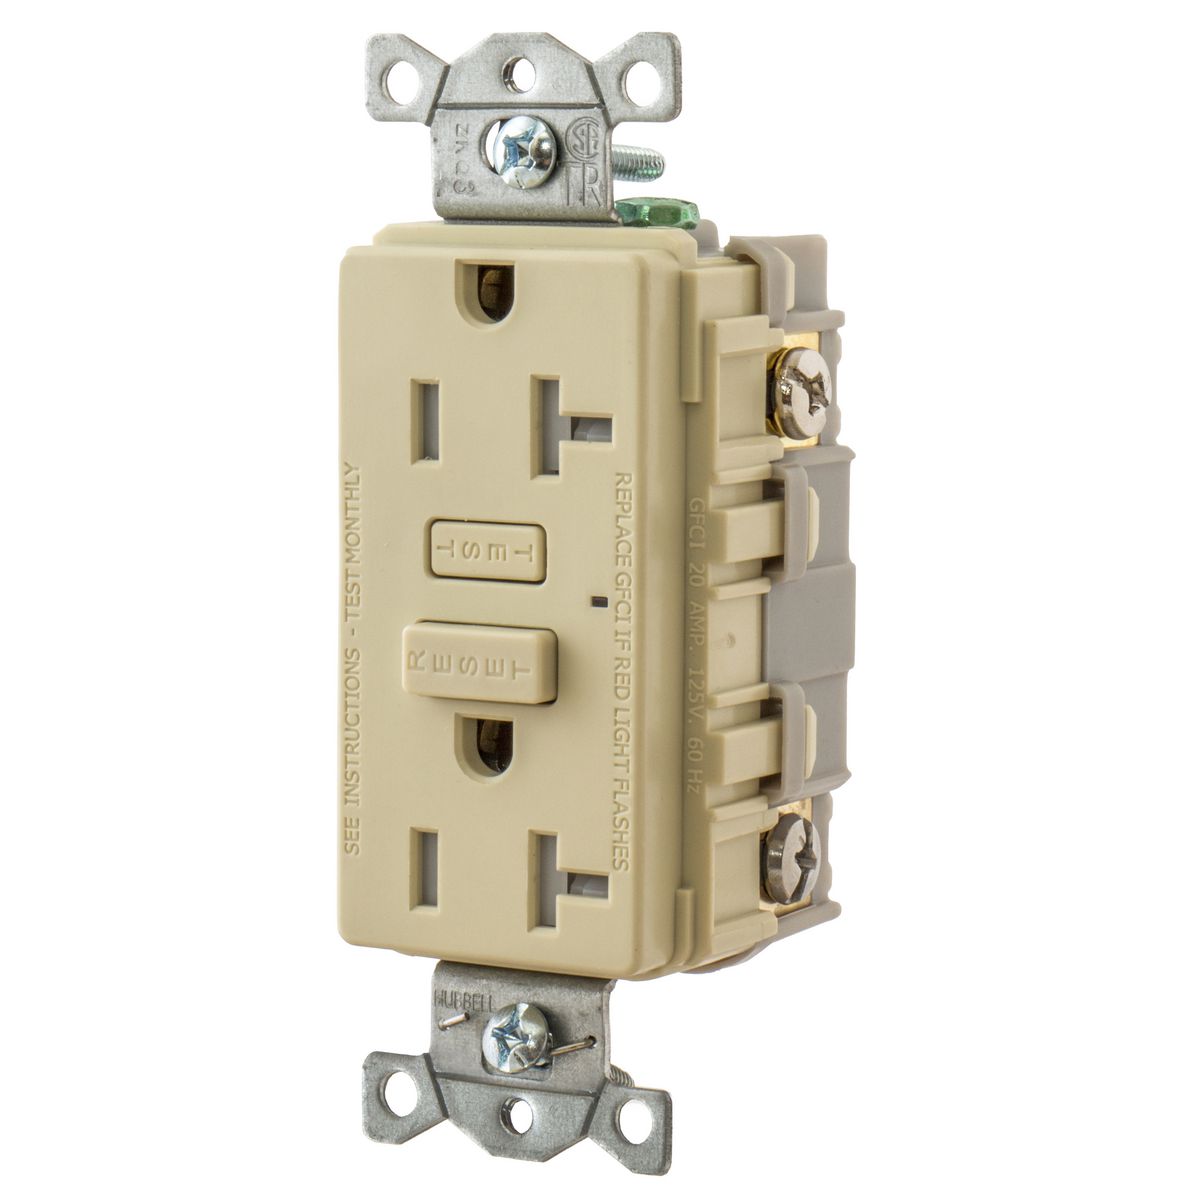 Hubbell Wiring Device Kellems, Power Protective Products, GFCIReceptacle, Hubbell Pro, 20A 125V AC, 2-Pole 3-Wire Grounding, 5-20R,Ivory